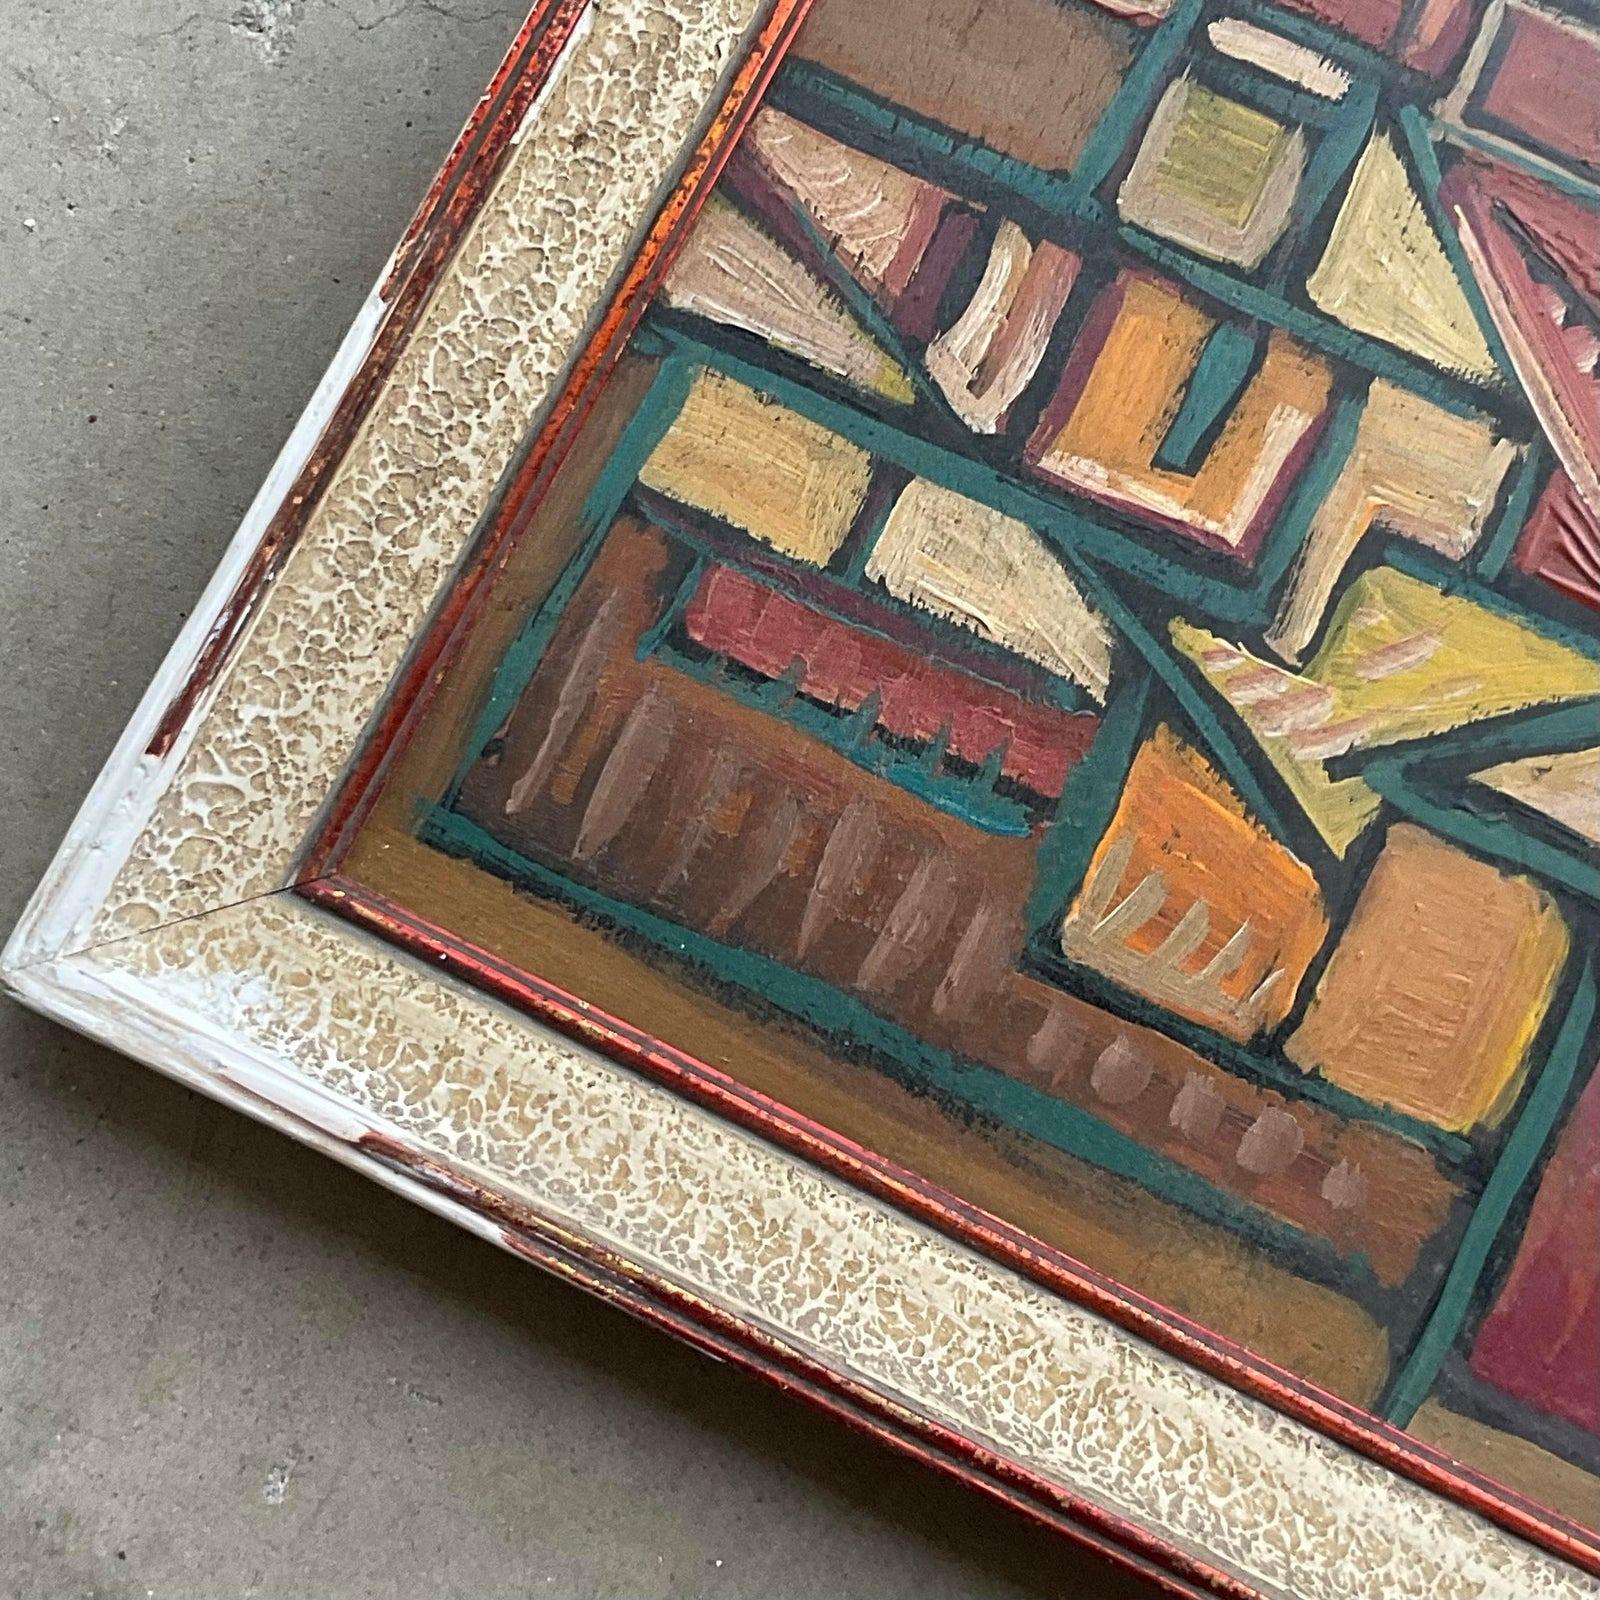 A fabulous vintage Boho original oil painting. A beautiful French abstract signed by the artist. Beautiful warm colors in this bold composition. Acquired from a Miami estate.

The painting is in great vintage condition. Minor scuffs and blemishes